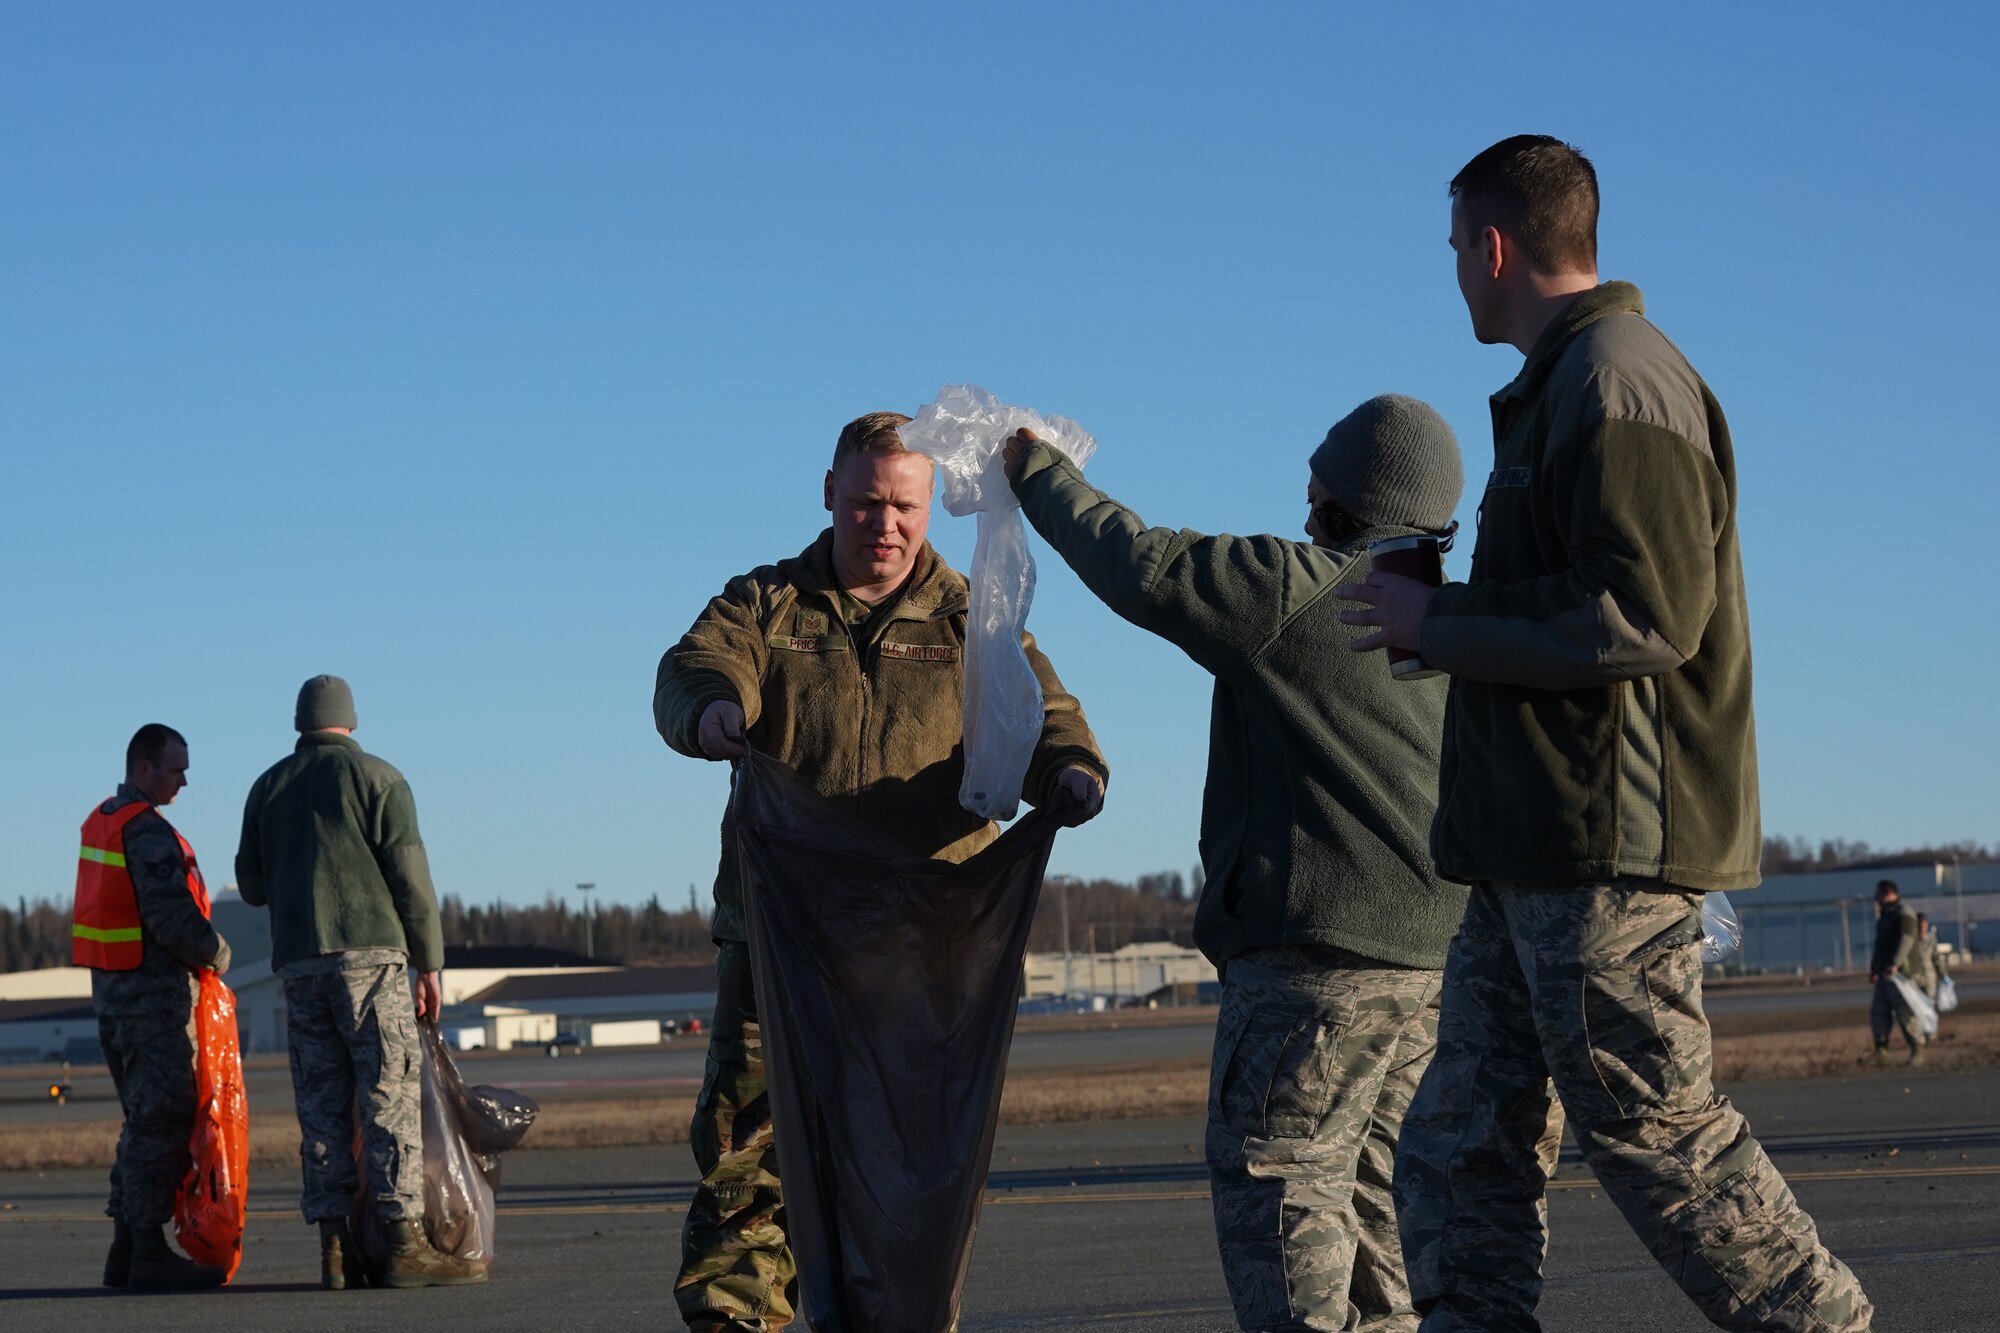 U.S. Airmen from the 3rd Wing, 176th Wing, and 477th Fighter Group conduct a foreign object debris walk on the flightline at Joint Base Elmendorf-Richardson, Alaska, April 26, 2019. The Airmen conducted the FOD walk to remove debris that could damage aircraft and hinder mission readiness.